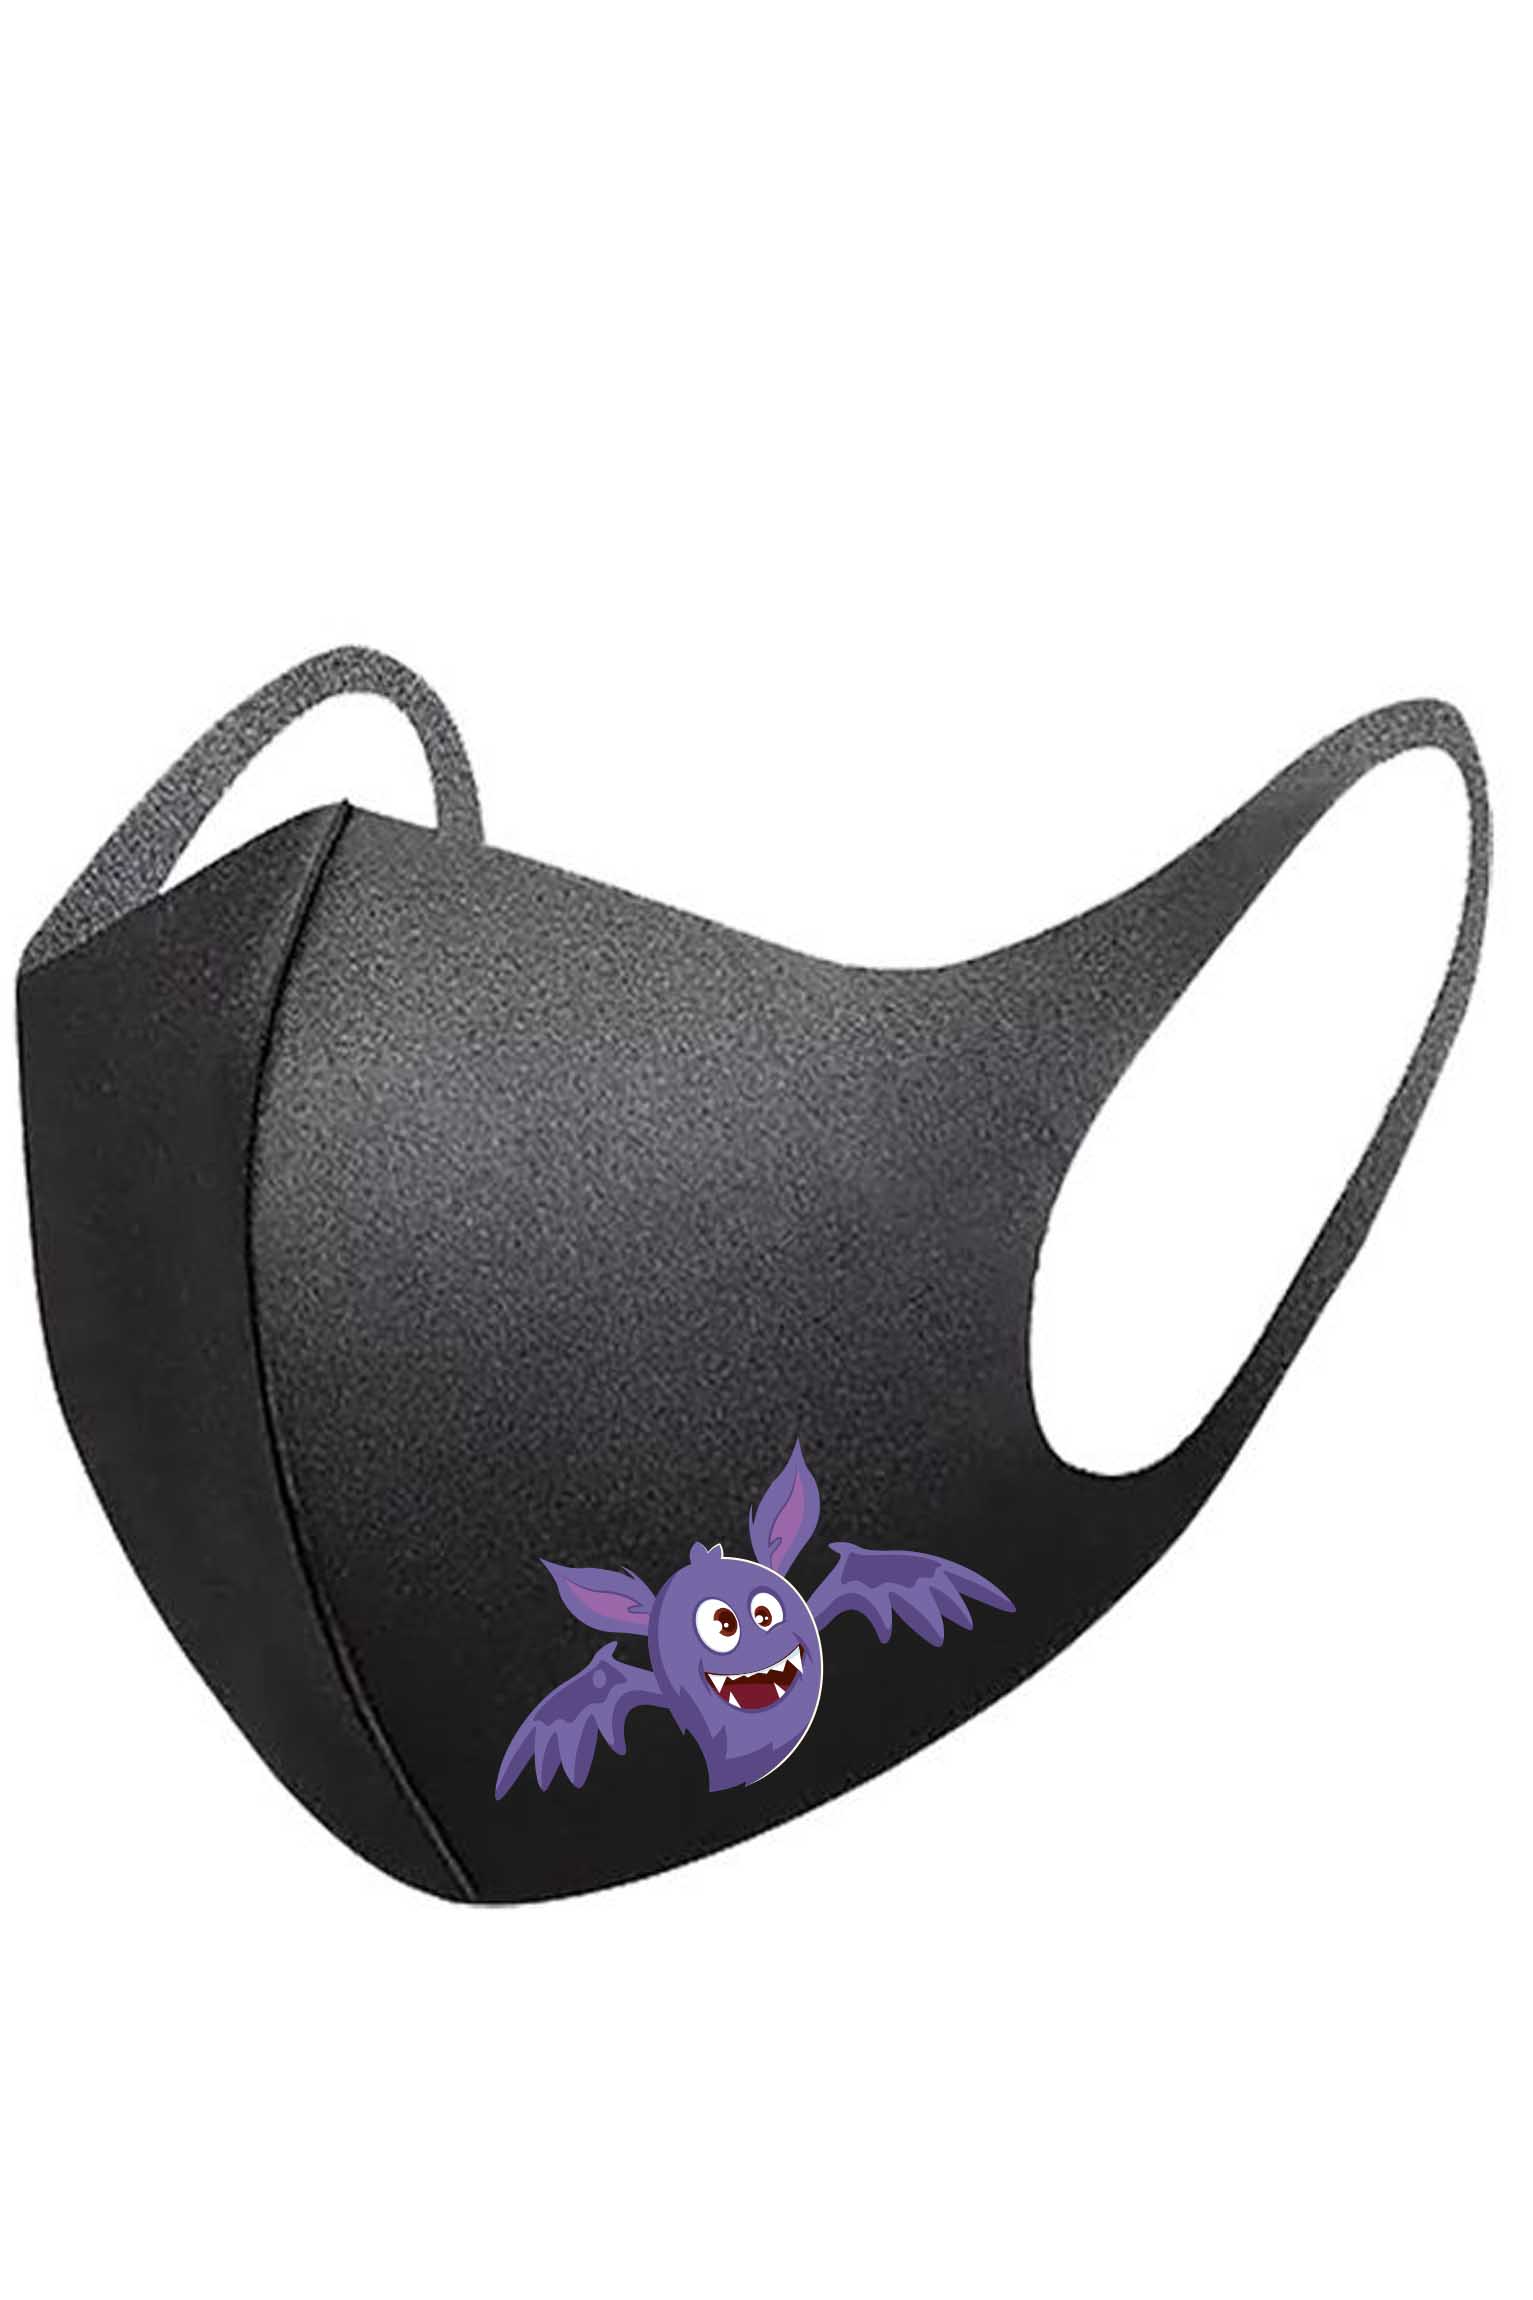 Essential Stretchable Fabric Purple Gargoyle Printed Reusable Face Mask